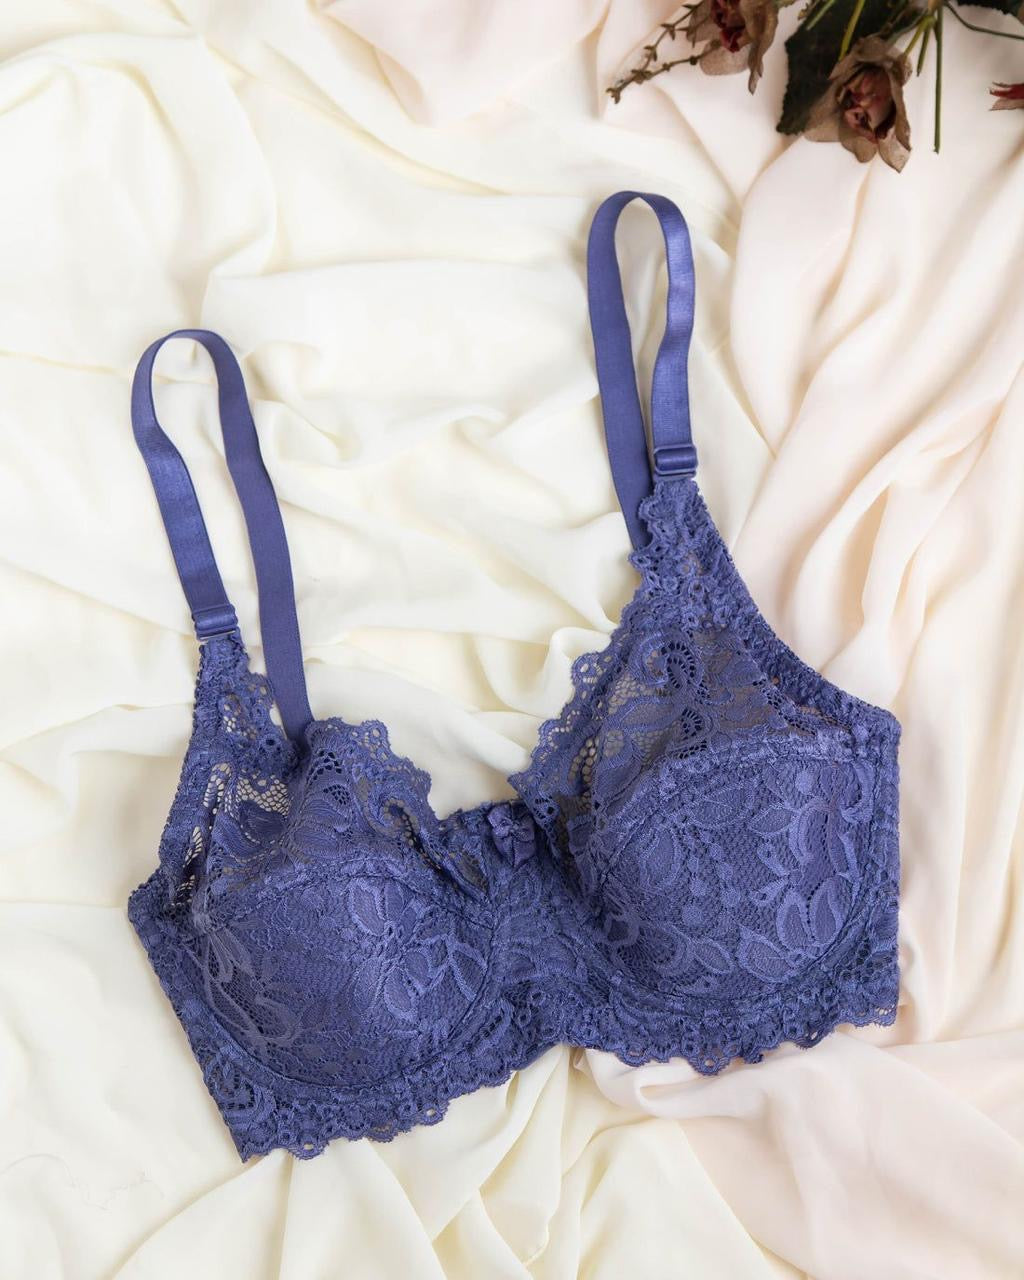 Non-padded underwired lace bra - Light blue - Ladies